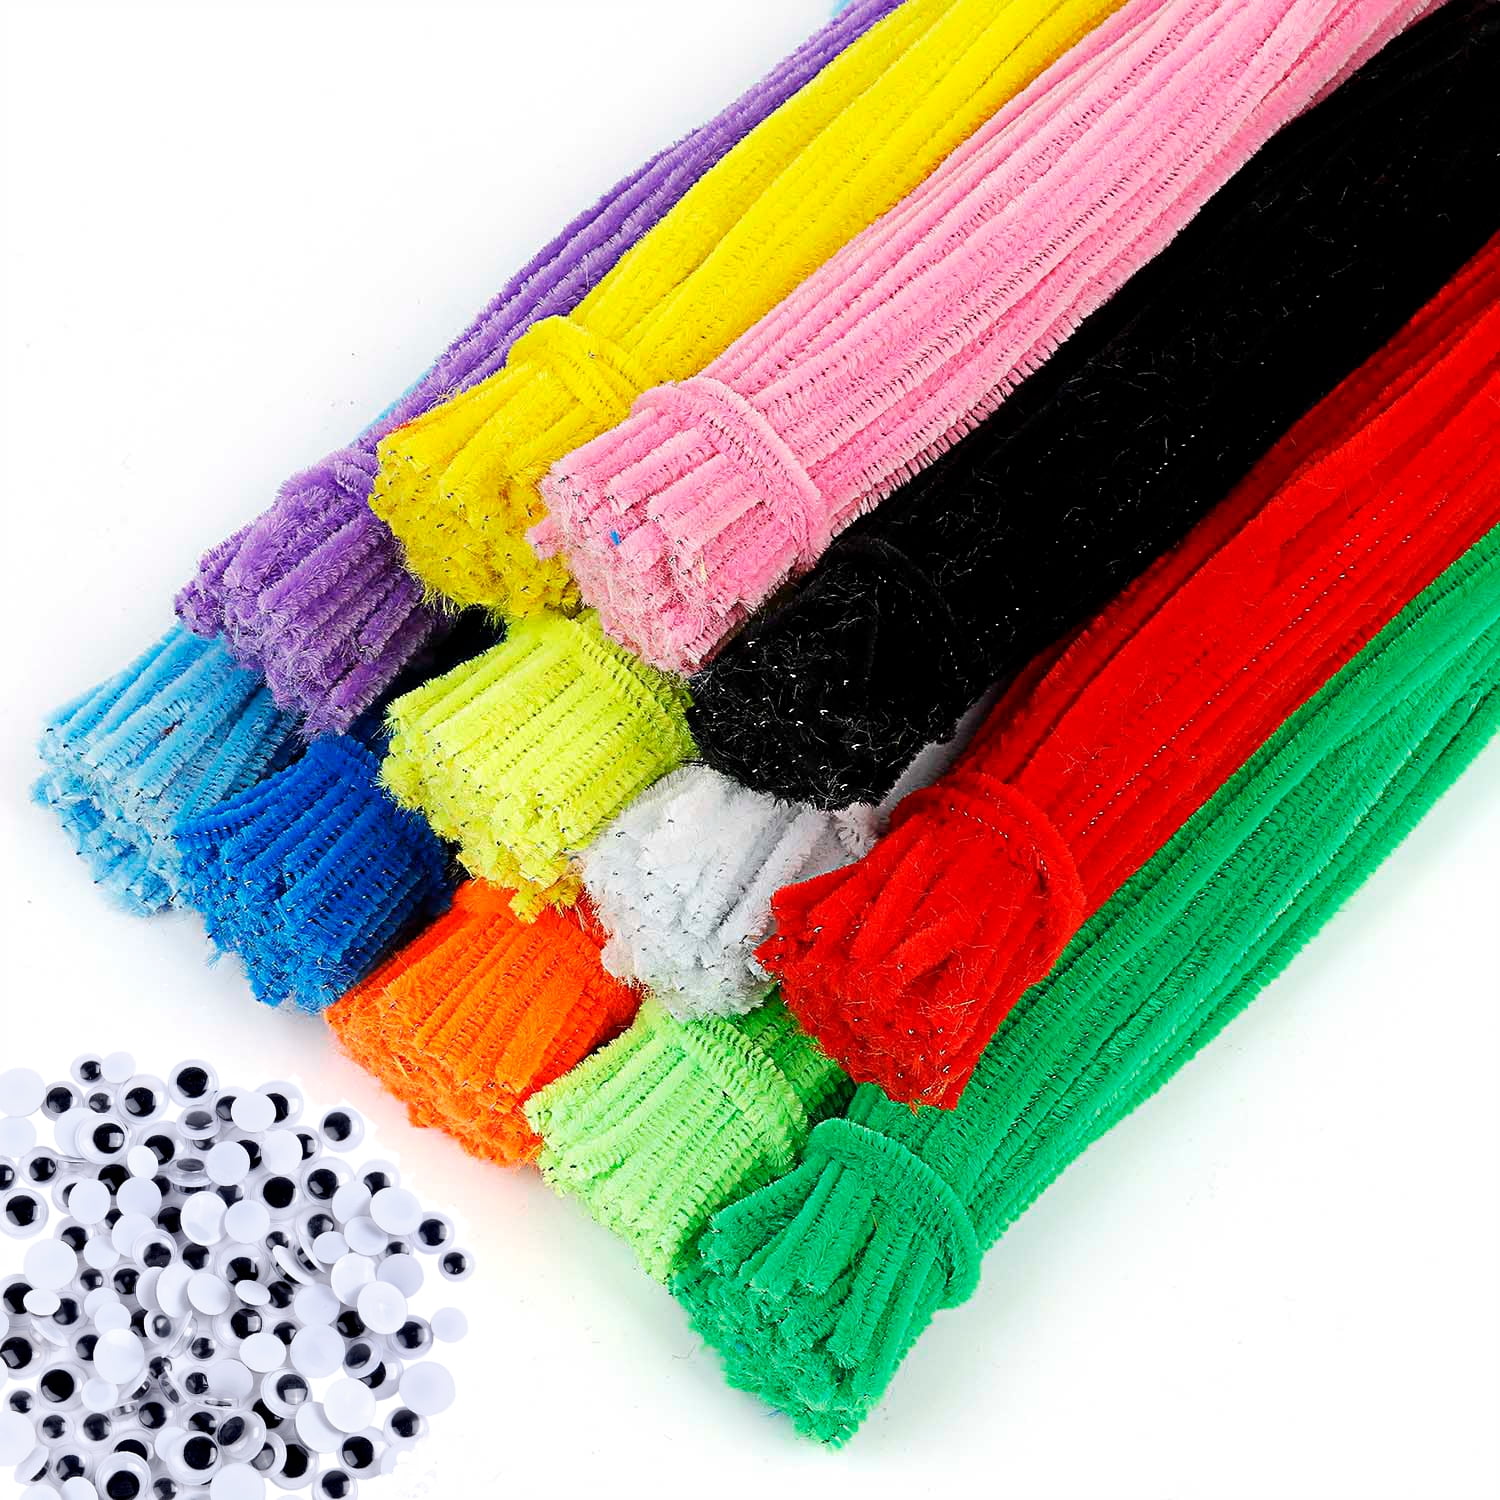 100x Mixed Colours Chenille Sticks Pipe Cleaners Assorted Colours U5C3 V0X2 